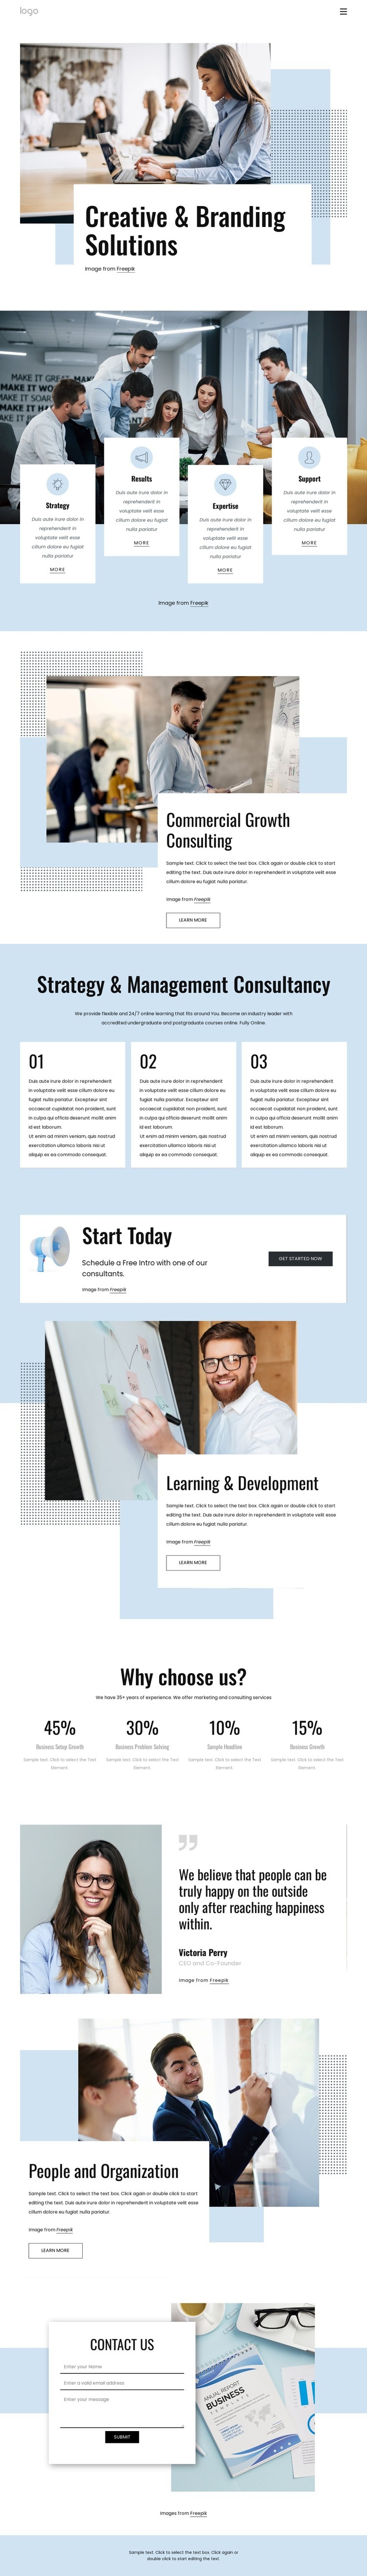 Commercial growth consulting Webflow Template Alternative